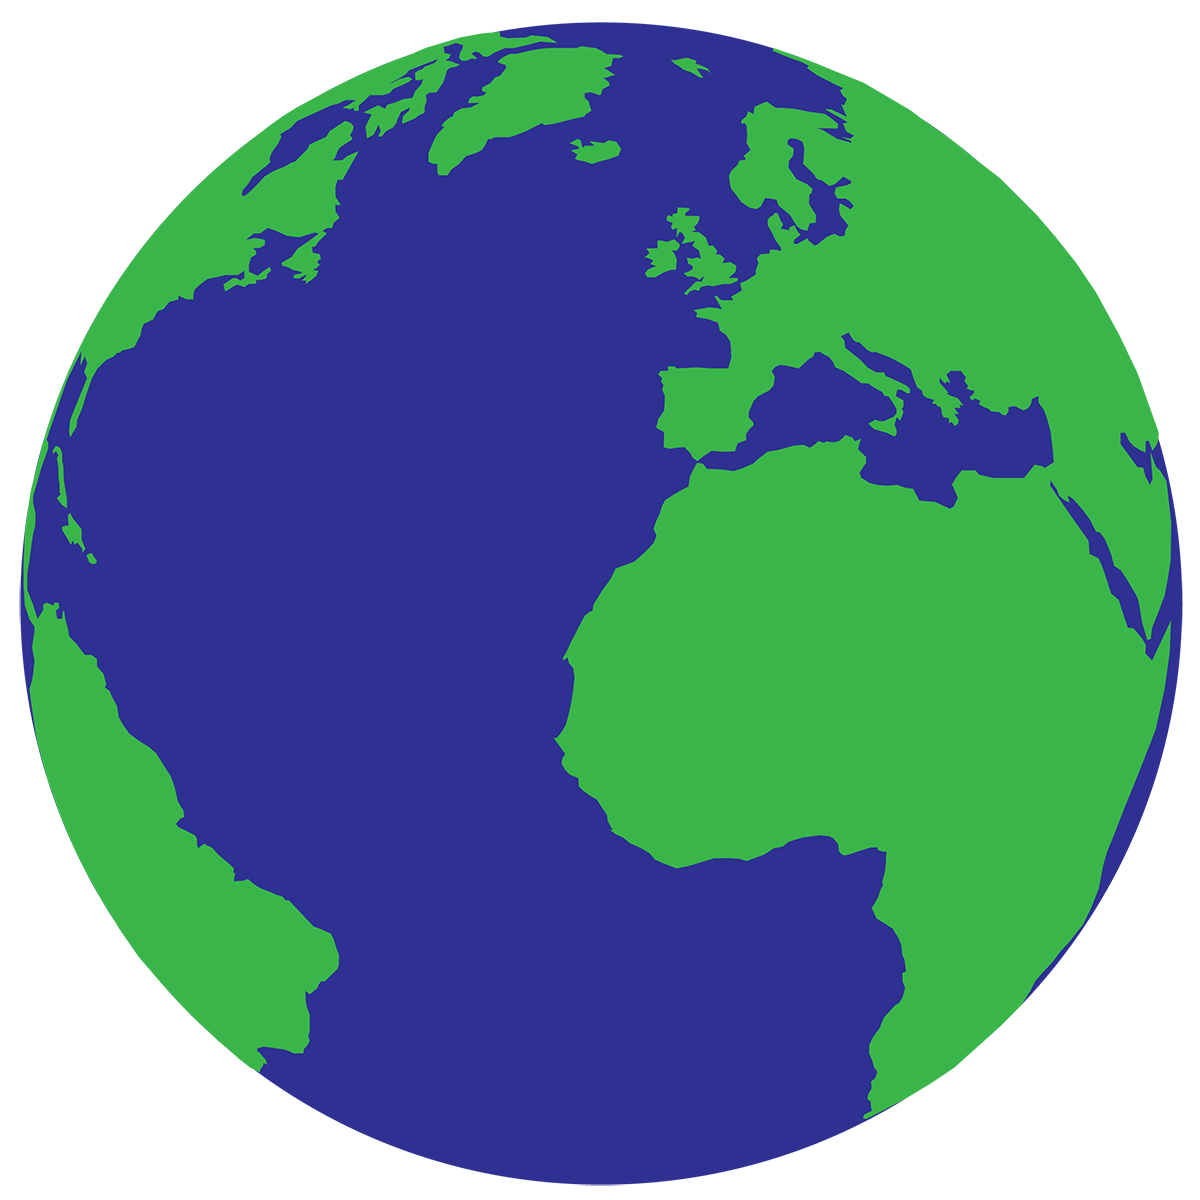 Earth planet drawing at. Youtube clipart basic